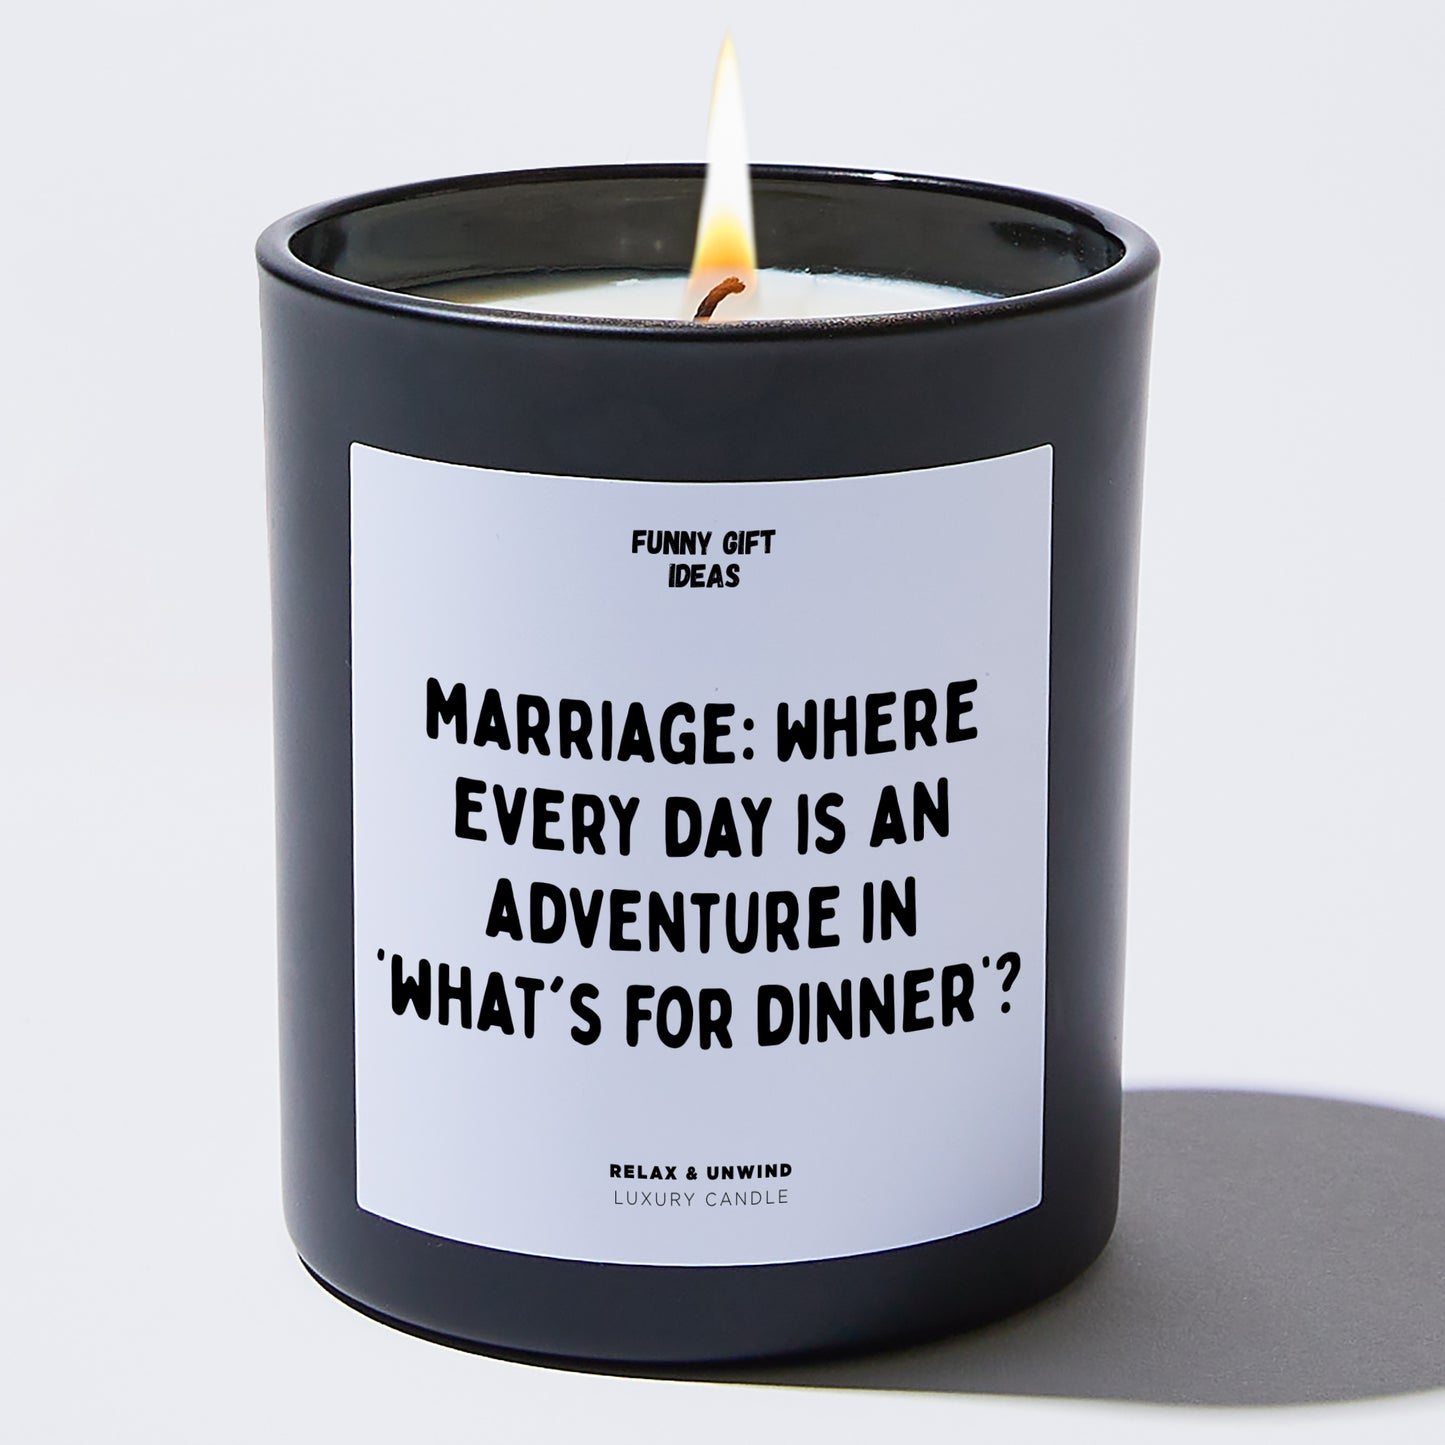 Anniversary Marriage: Where Every Day is an Adventure in What's for Dinner? - Funny Gift Ideas